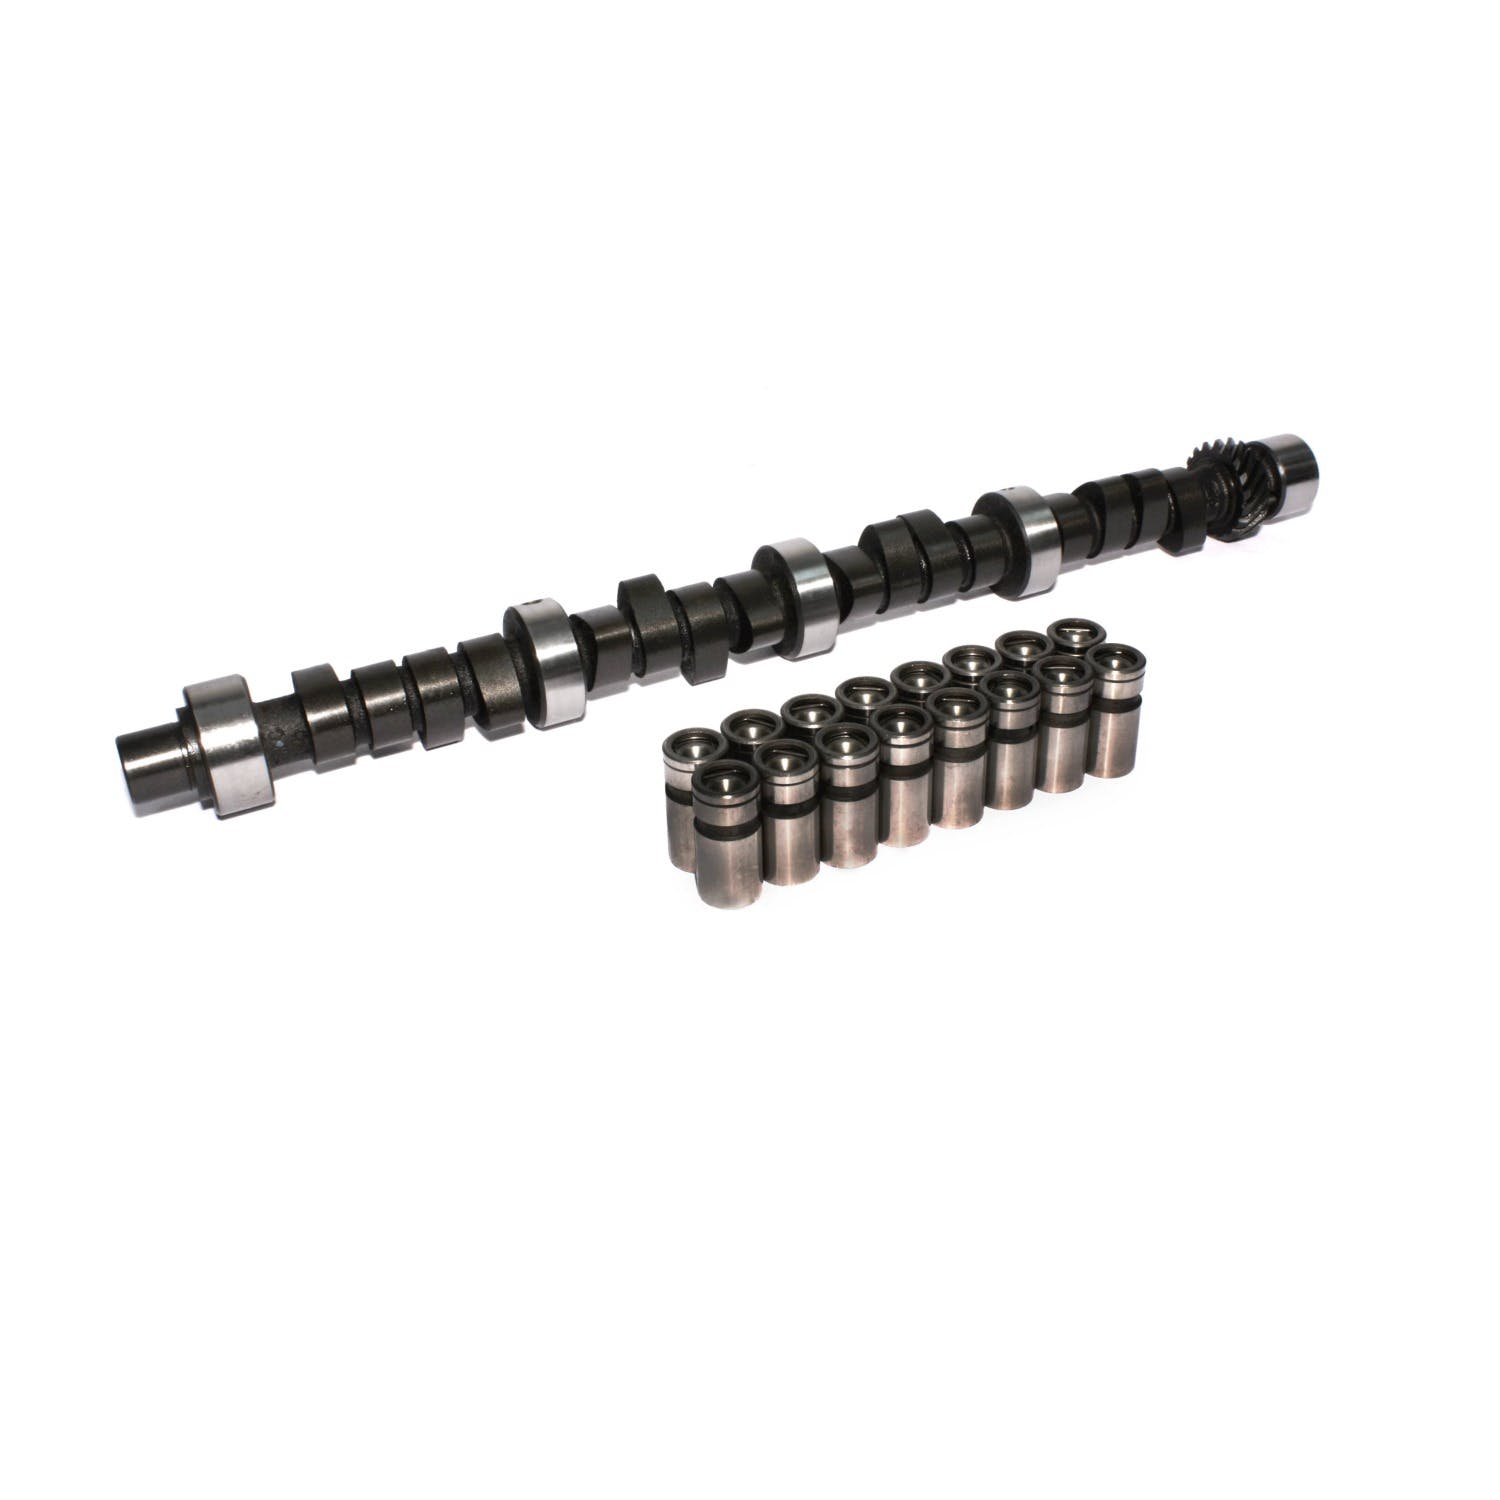 Competition Cams CL20-208-2 High Energy Camshaft/Lifter Kit